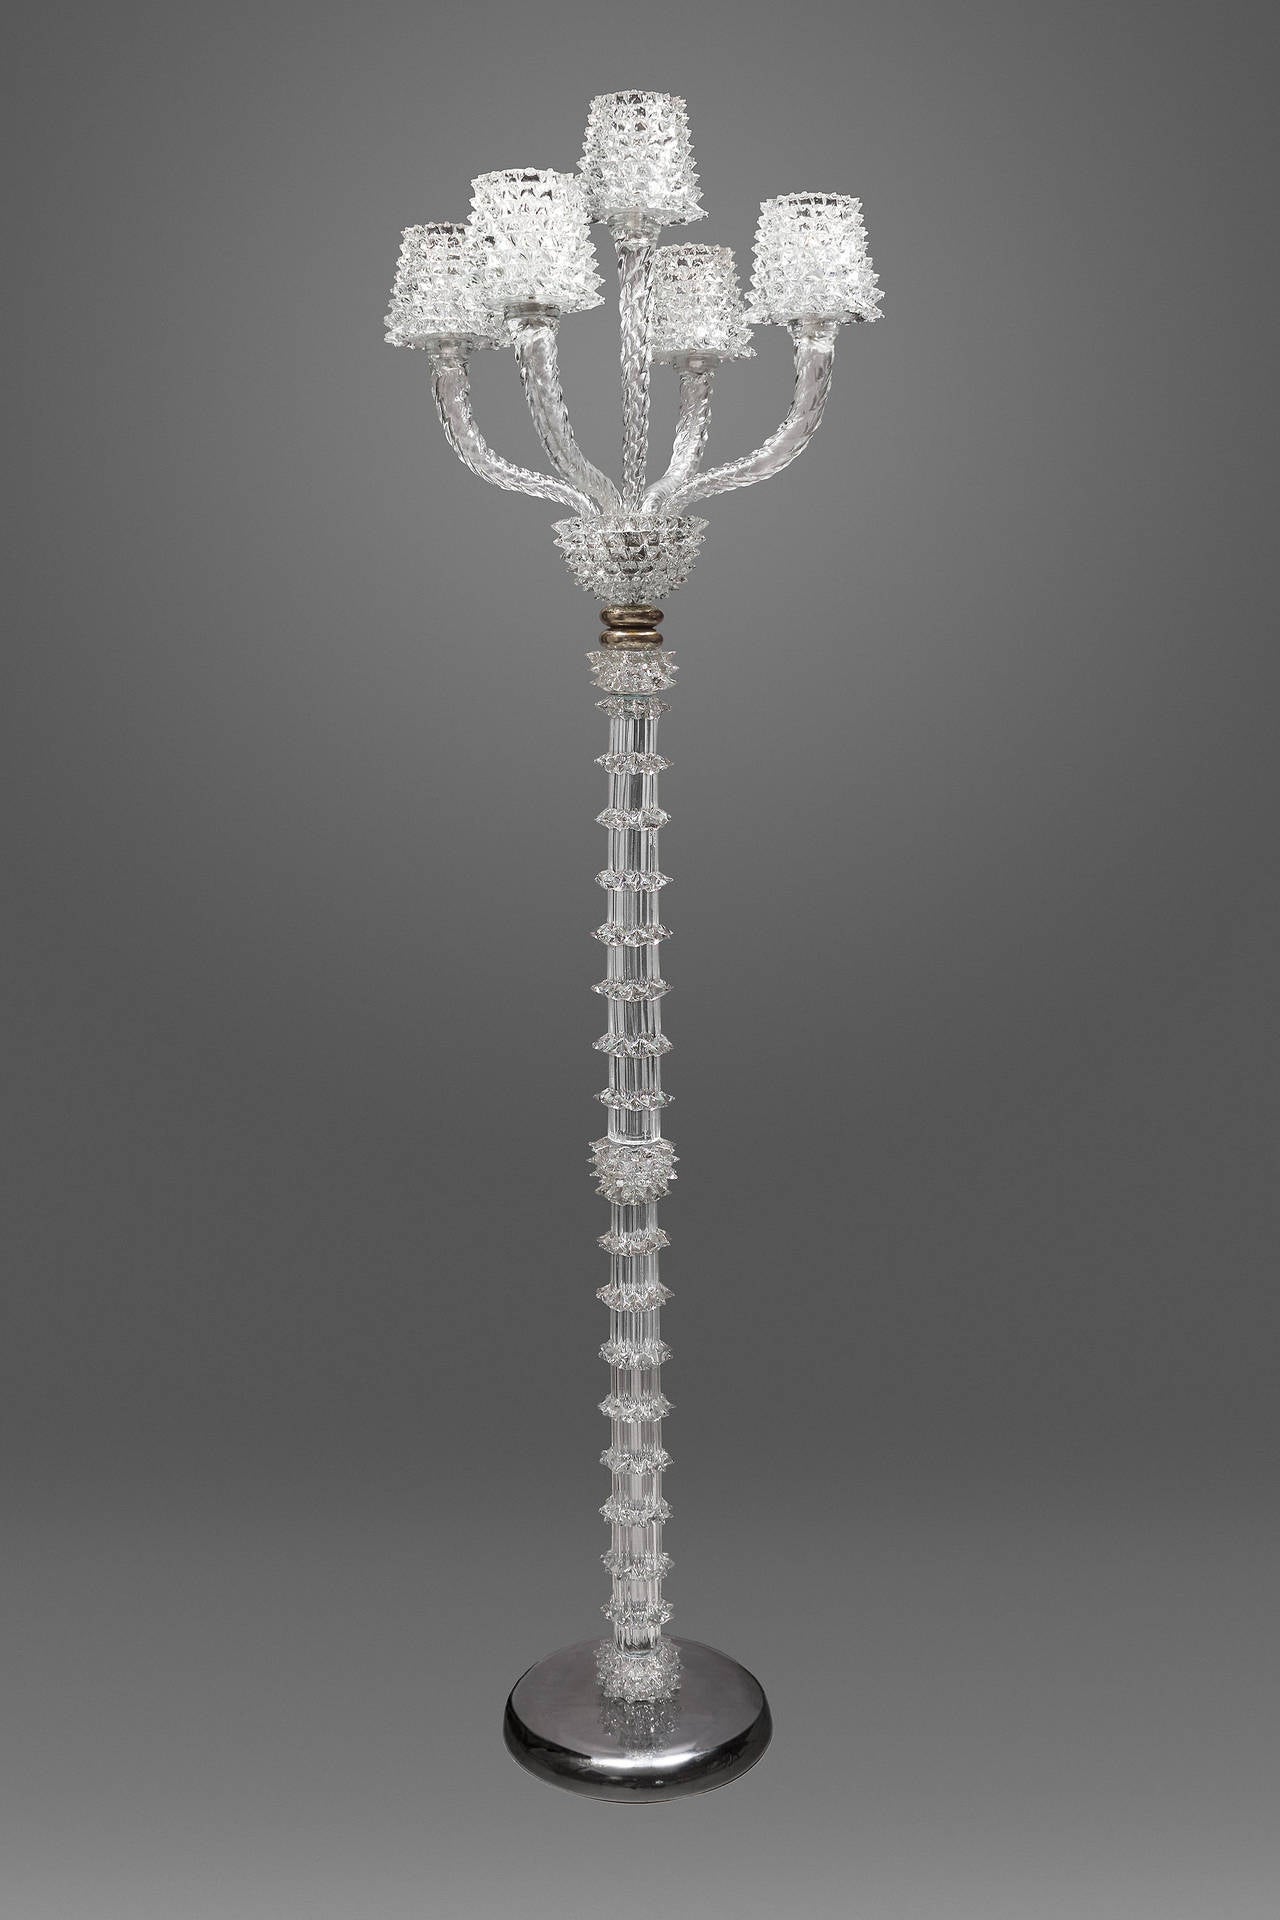 Floor lamp by Barovier e Toso
Model Rostrato
Italy circa 1950
Perfect original condition
The stem is made of glass crowns with small points of crystals (Rostrato technique)
Five arms supporting glass lamp shades